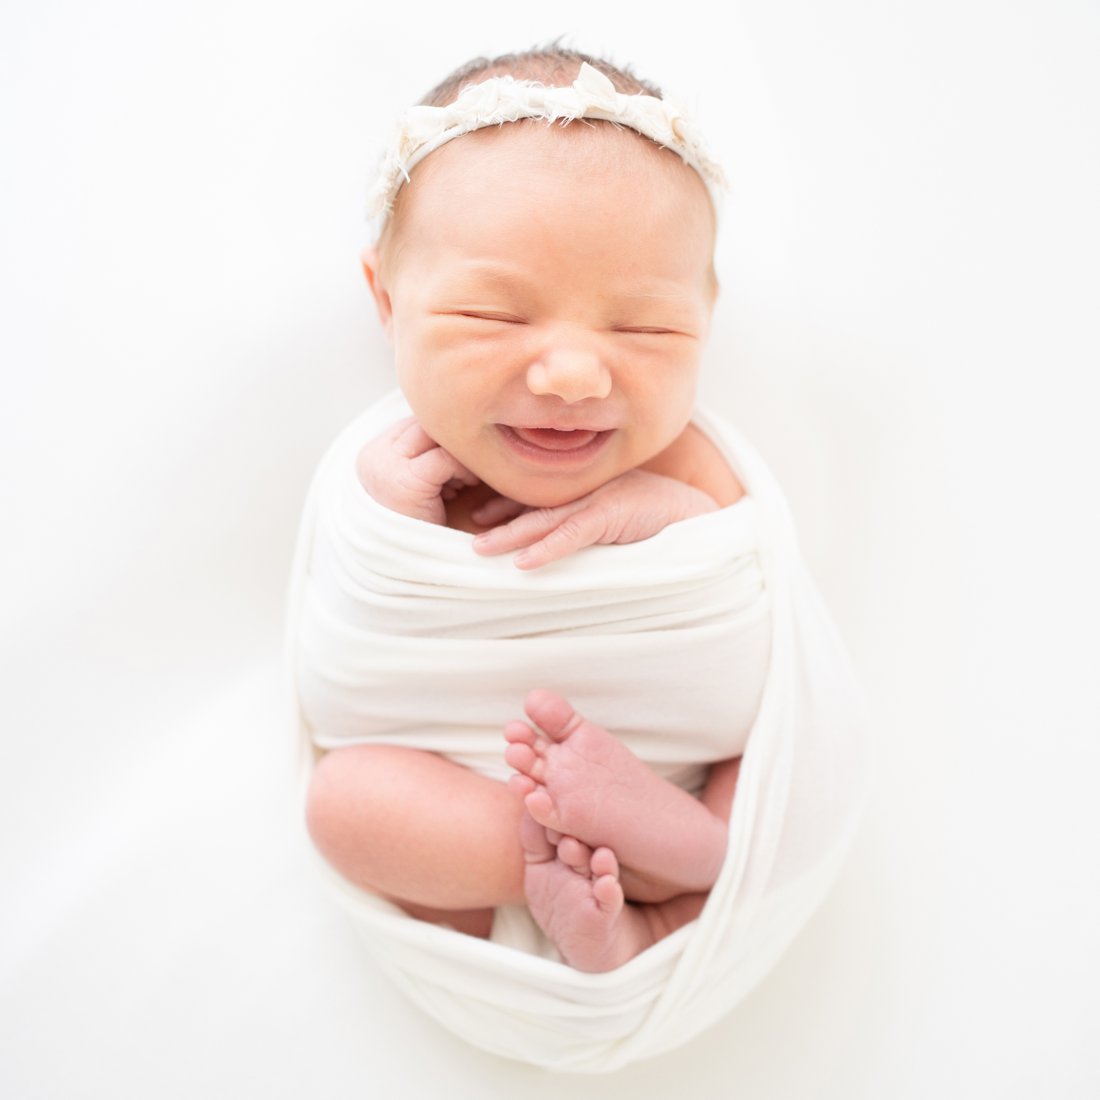 Newborn baby lying on her back with a big smile